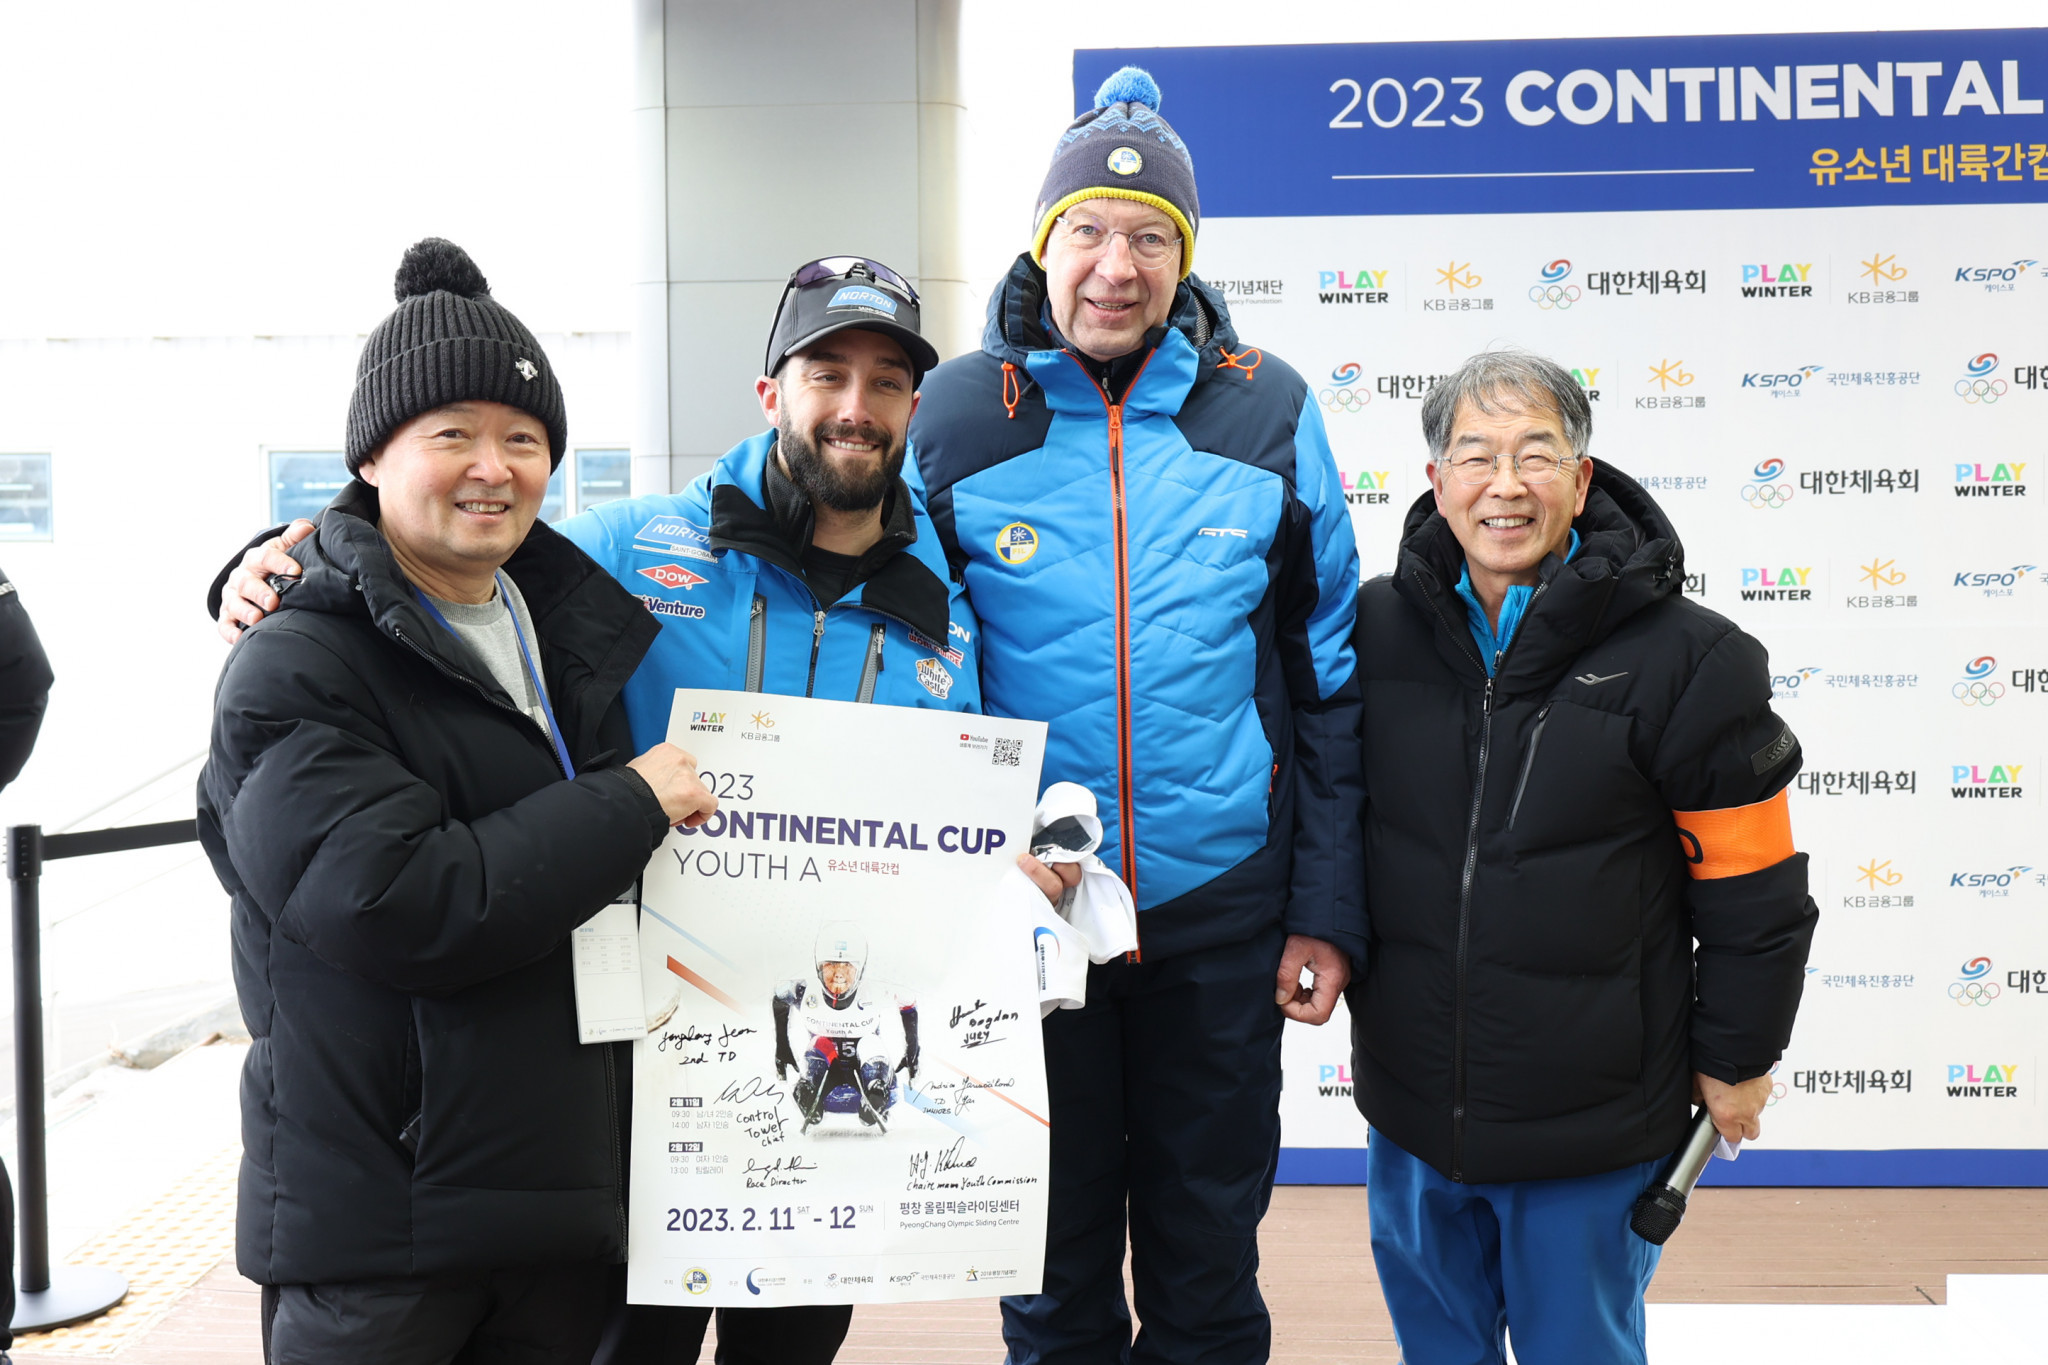 Hans-Jürgen Köhne, second from right, has praised South Korea's organisers for their arrangements at the sliding track to be used for the Winter Youth Olympics next year ©FIL